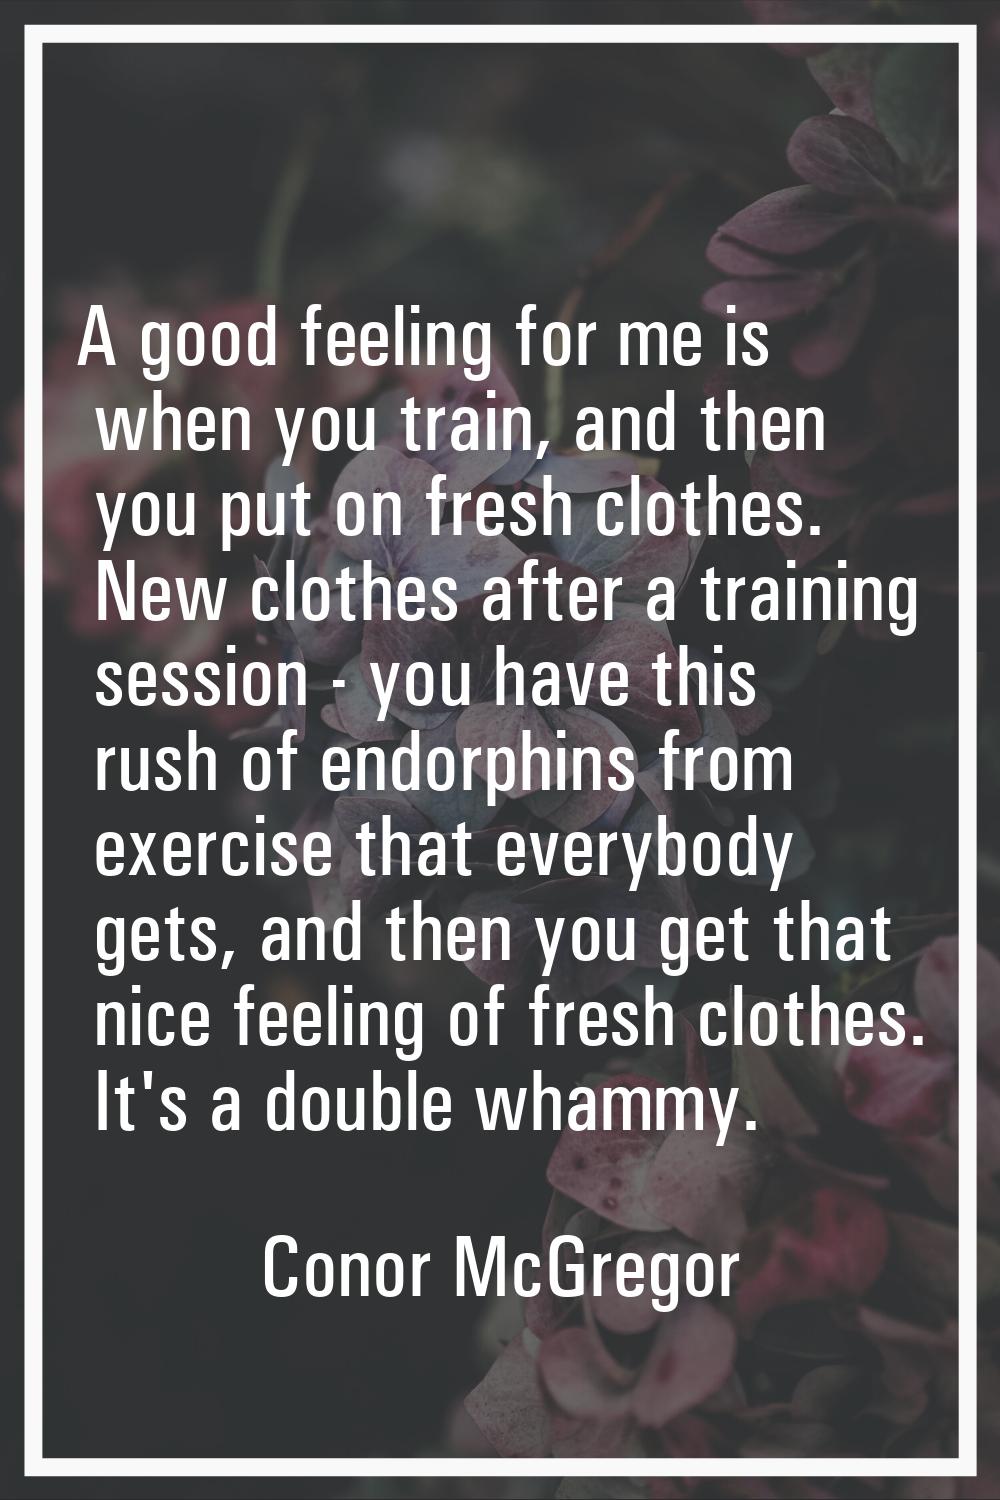 A good feeling for me is when you train, and then you put on fresh clothes. New clothes after a tra